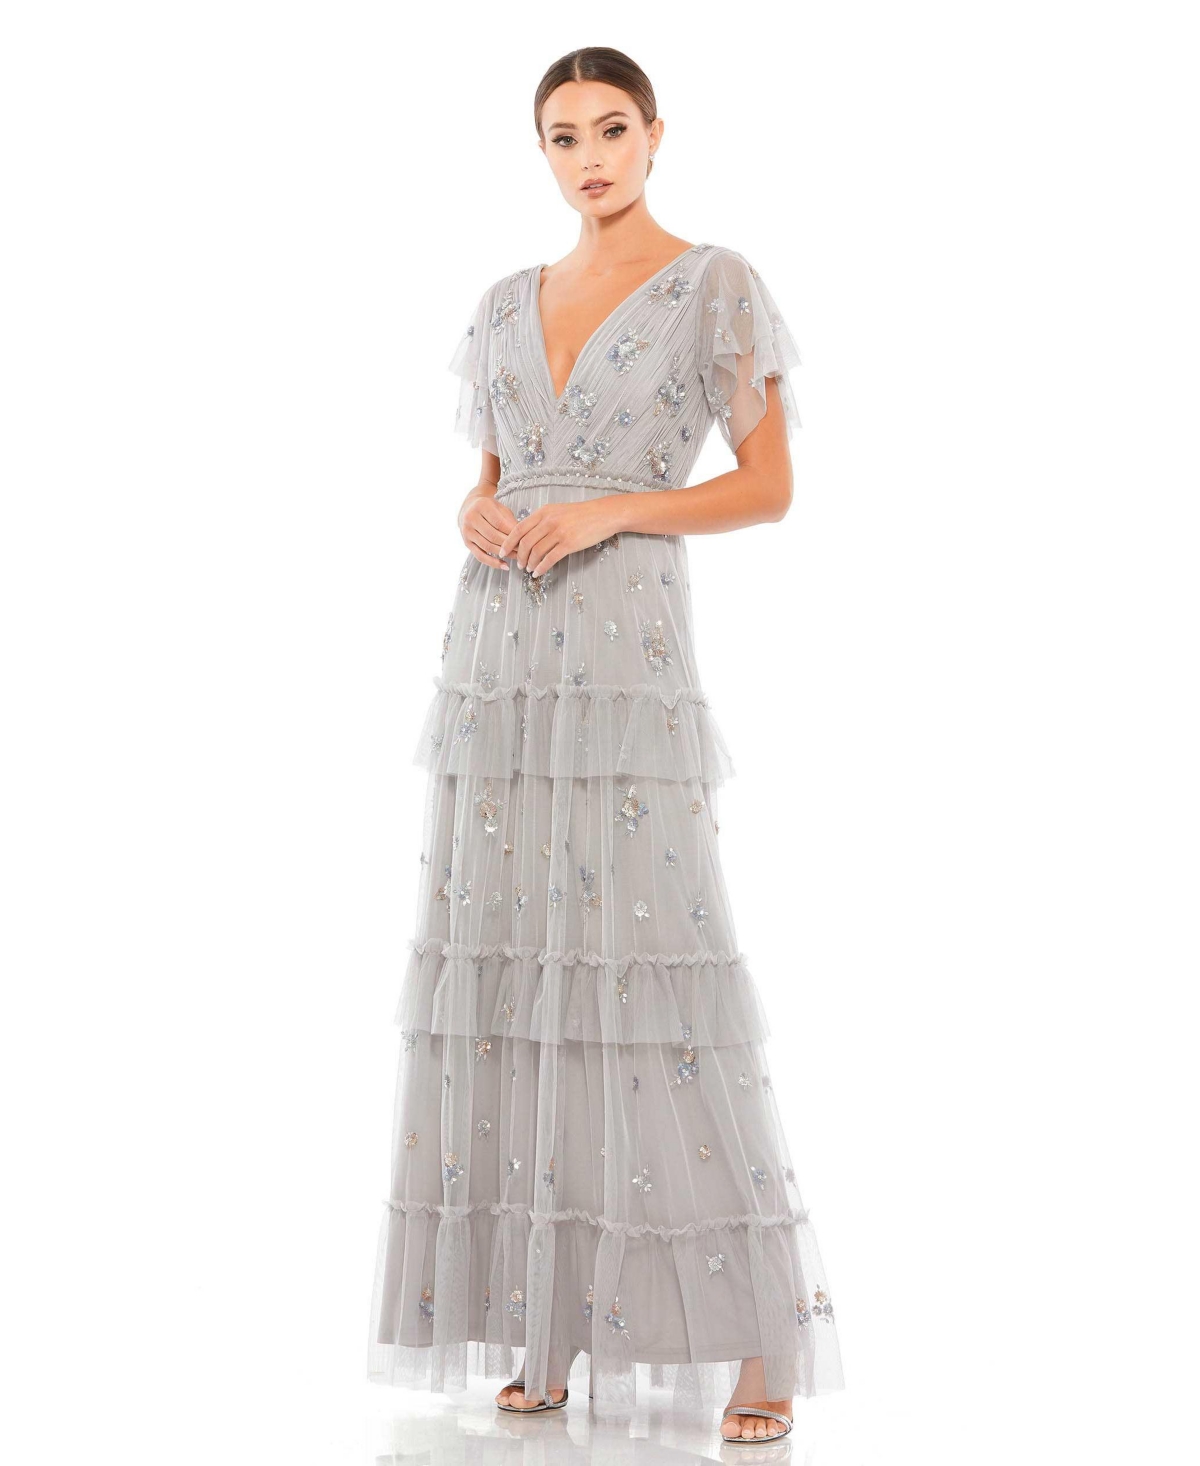 Best 1920s Prom Dresses – Great Gatsby Style Gowns Womens Ruffle Tiered Embellished Flutter Sleeve Gown - Platinum $598.00 AT vintagedancer.com